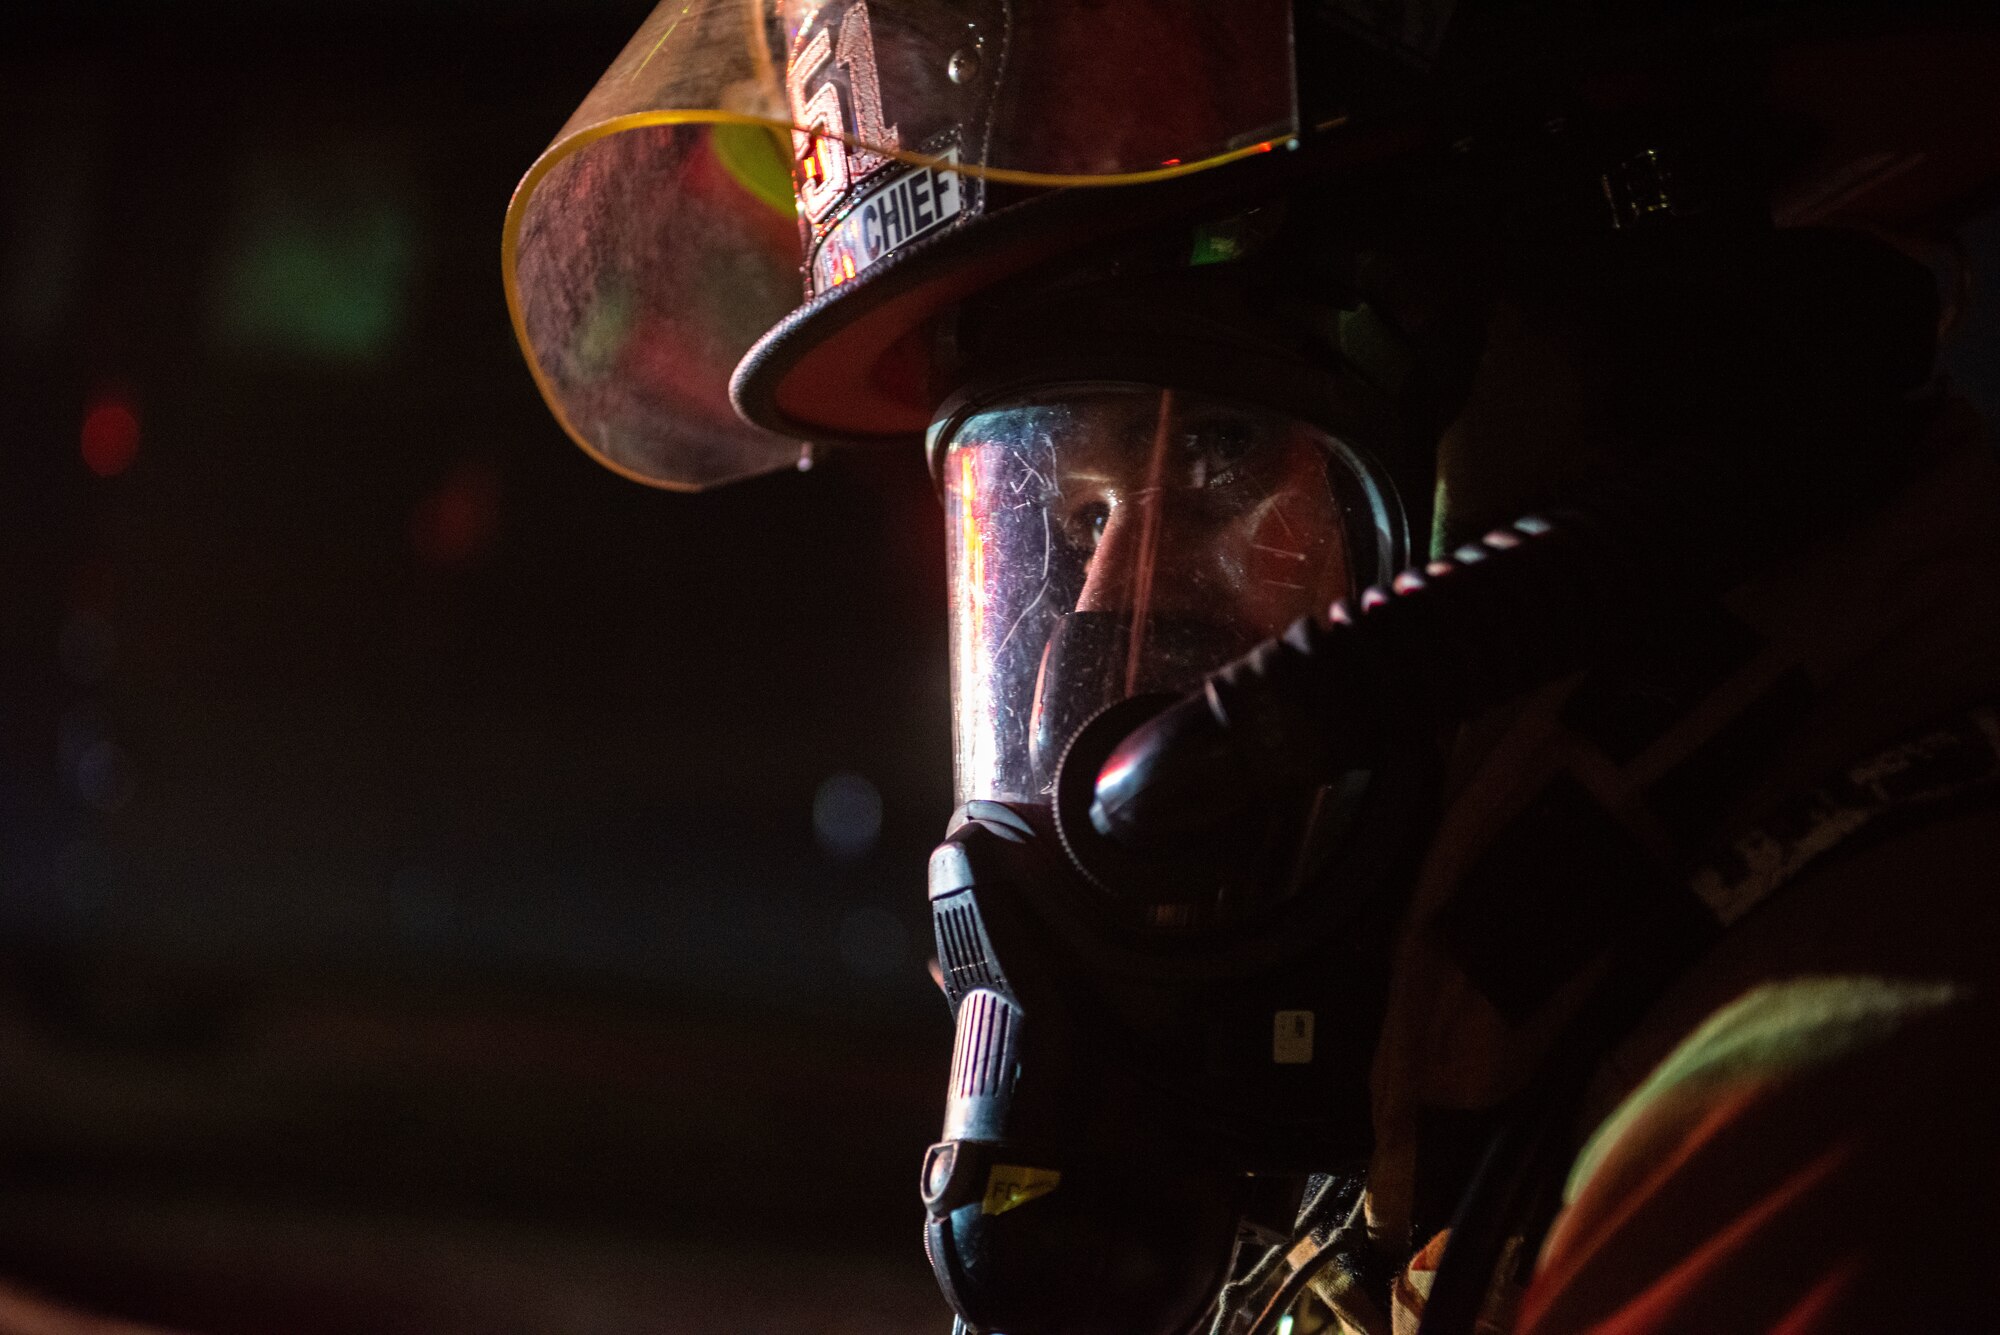 U.S. Air Force Staff Sgt. Benny Bowen, 51st Civil Engineer Squadron lead firefighter, waits for further directions during a fire response scenario at Osan Air Base, Republic of Korea, Sept. 12, 2022, in support of a wing training event.